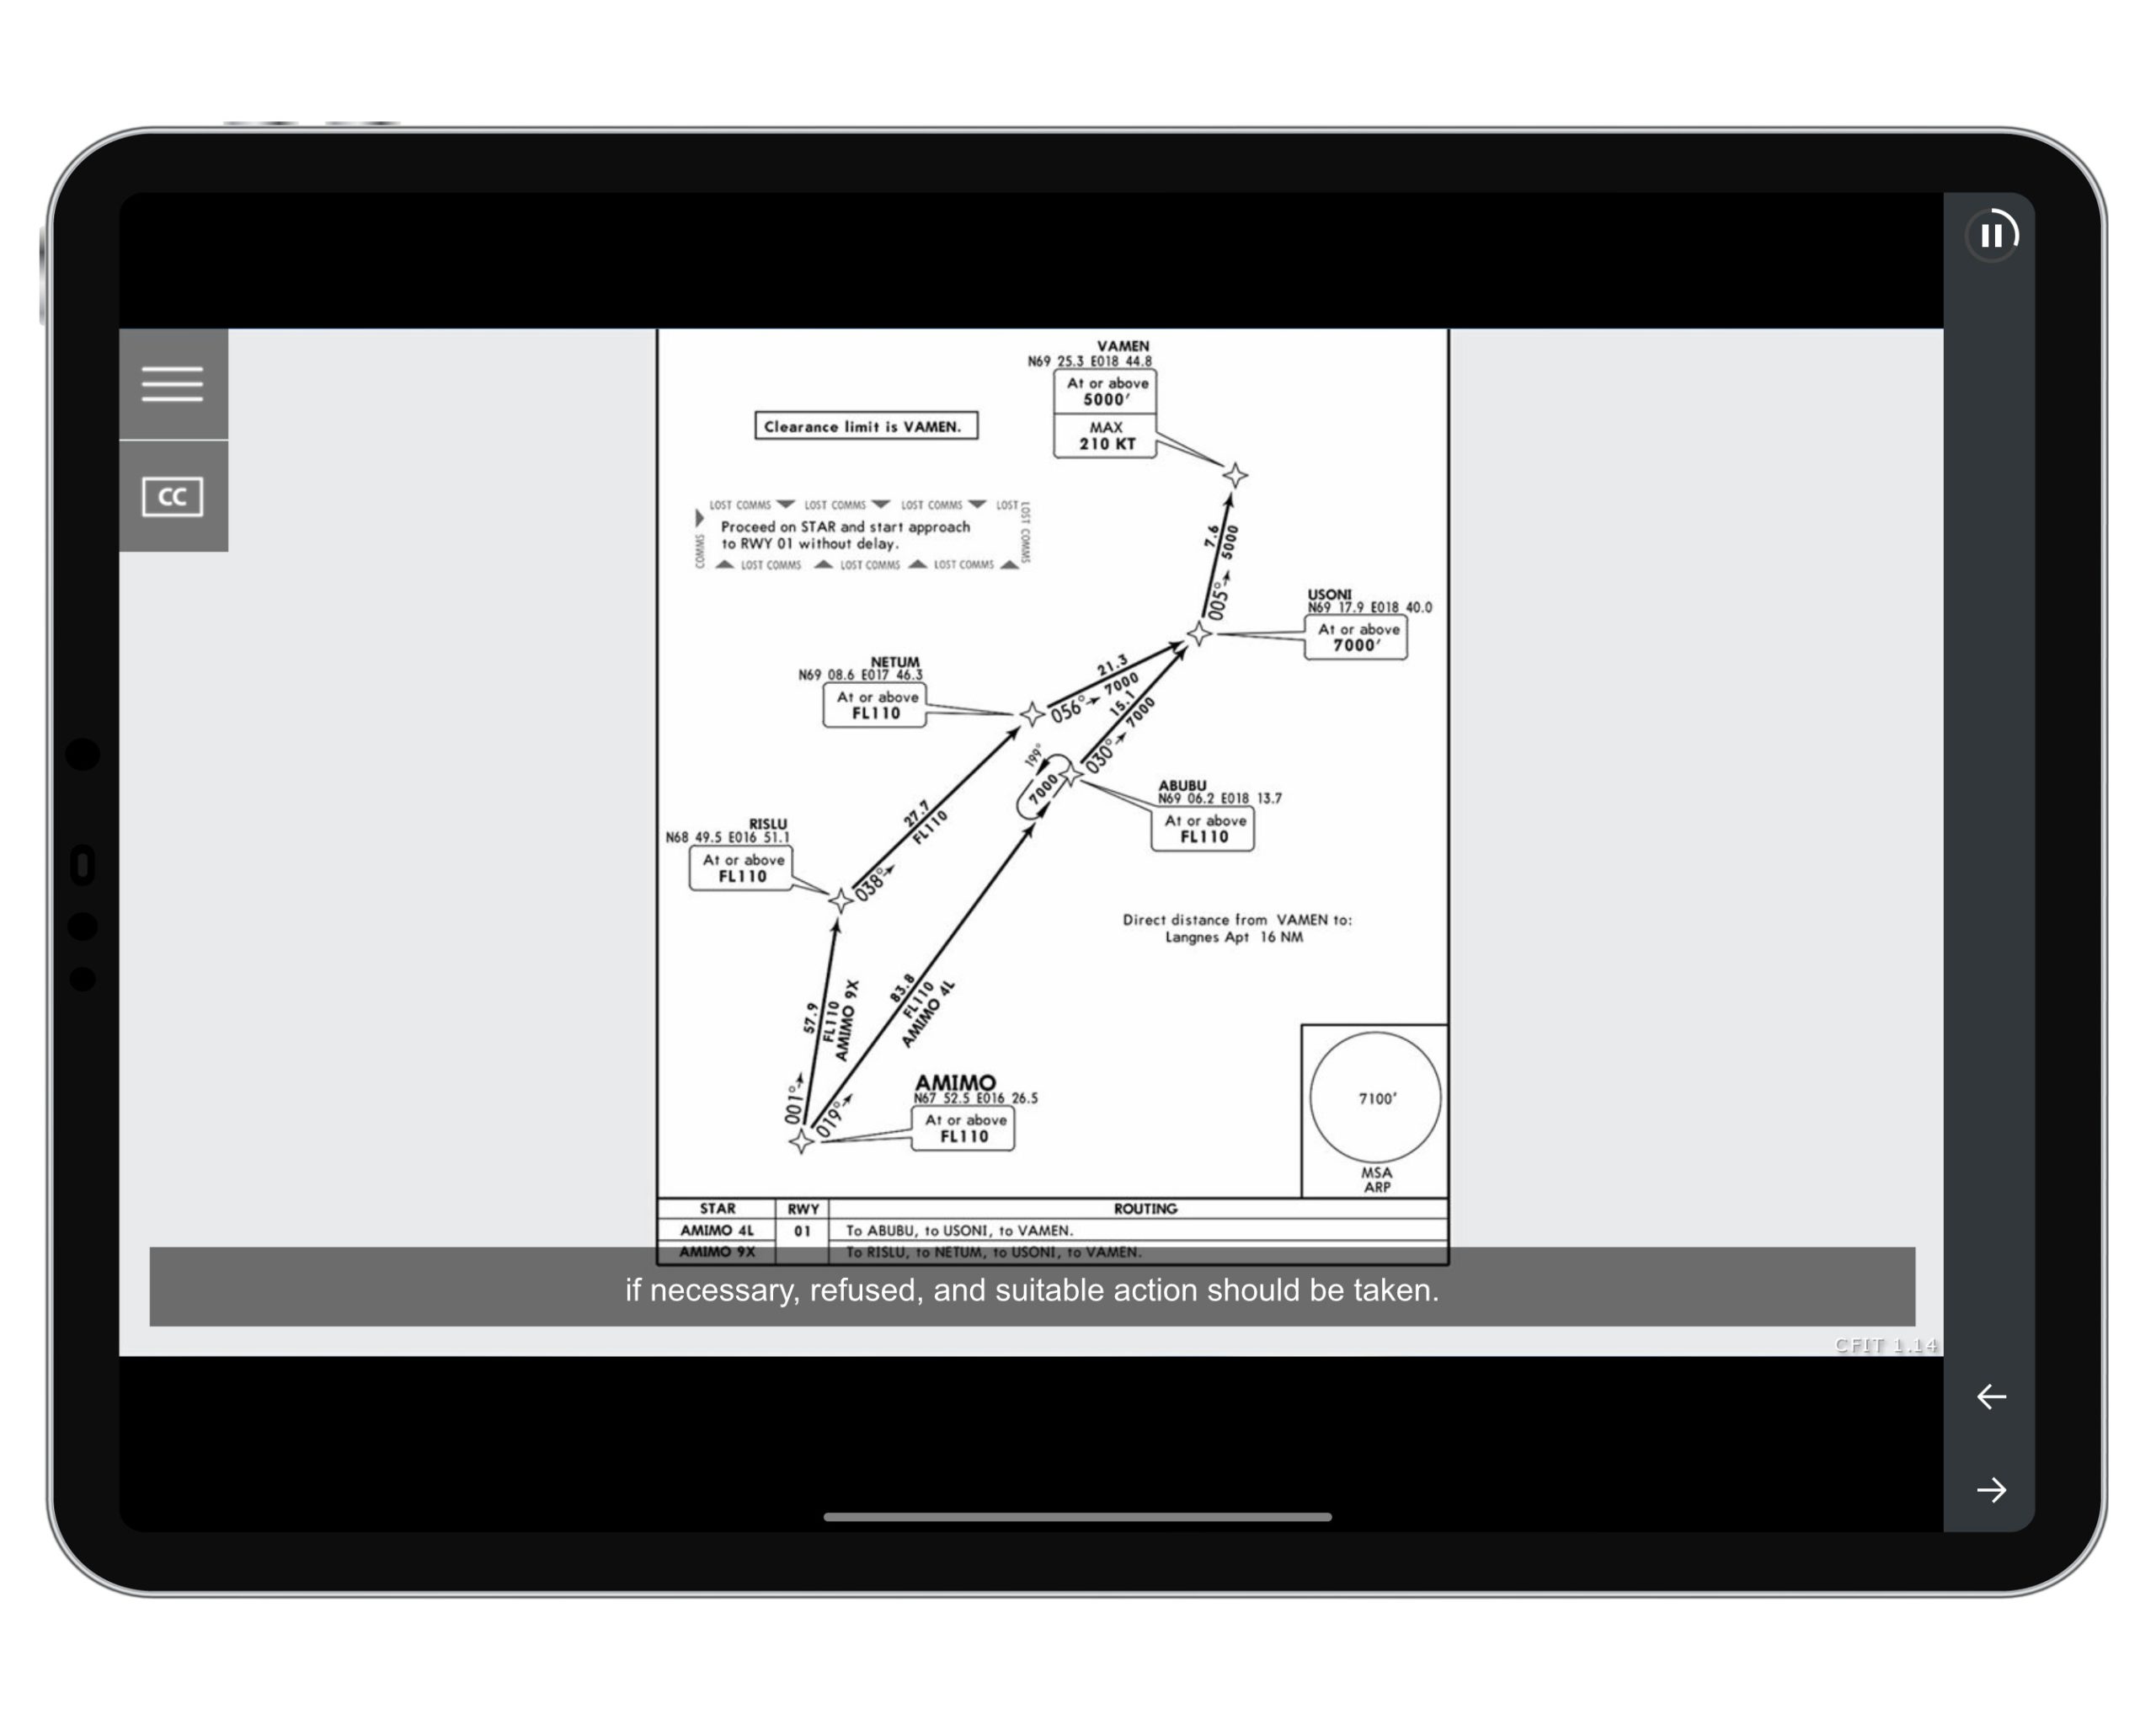 Screenshot showing Controlled Flight Into Terrain course for the airline flight crew and instructors.